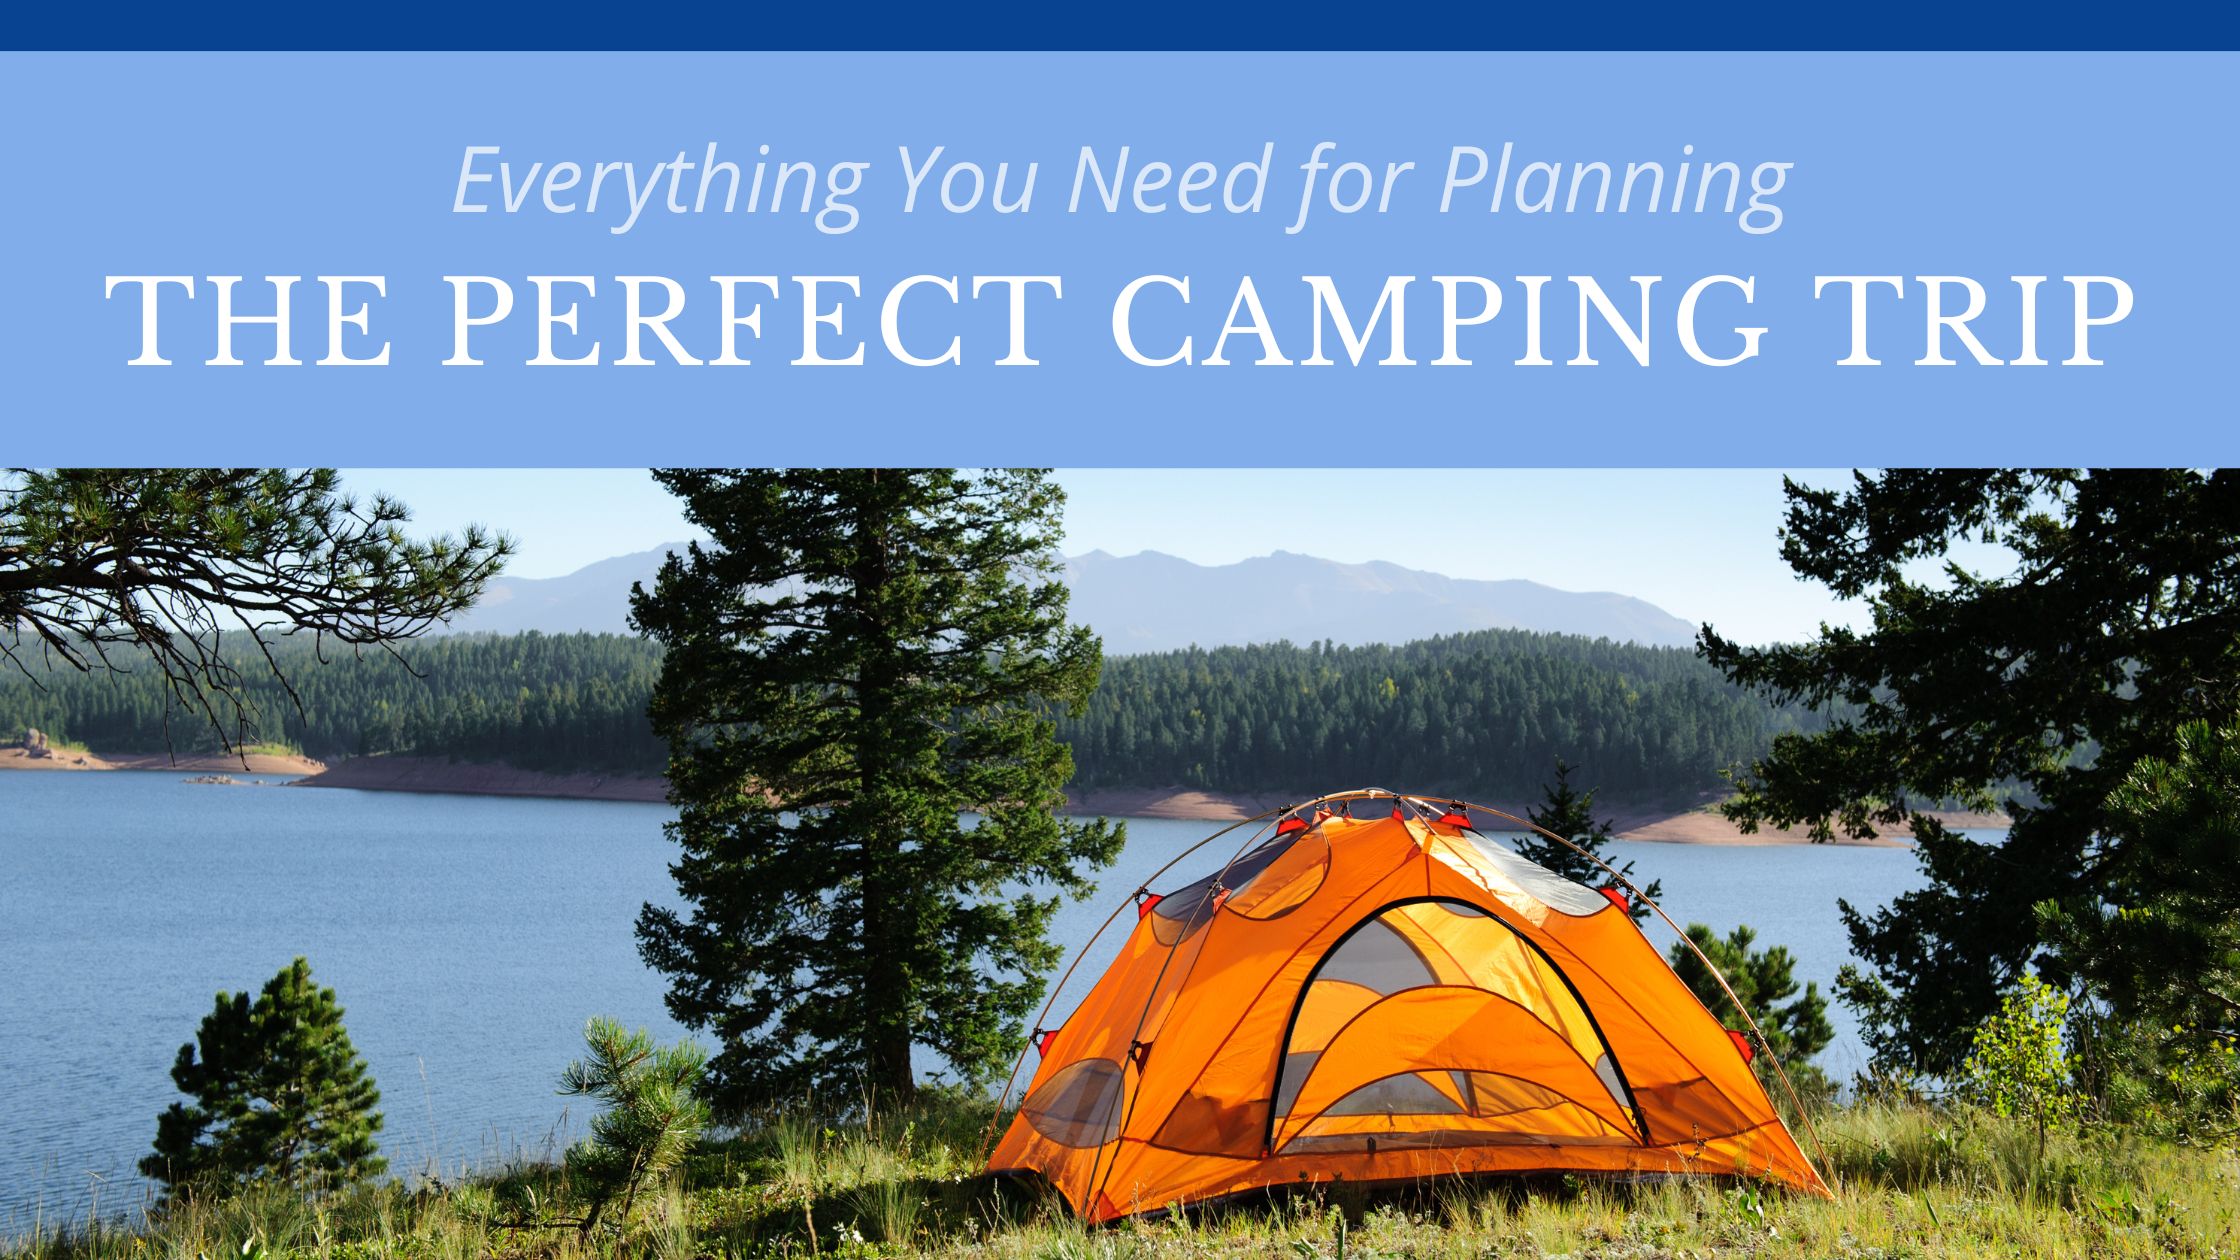 Everything You Need for Planning the Perfect Camping Trip